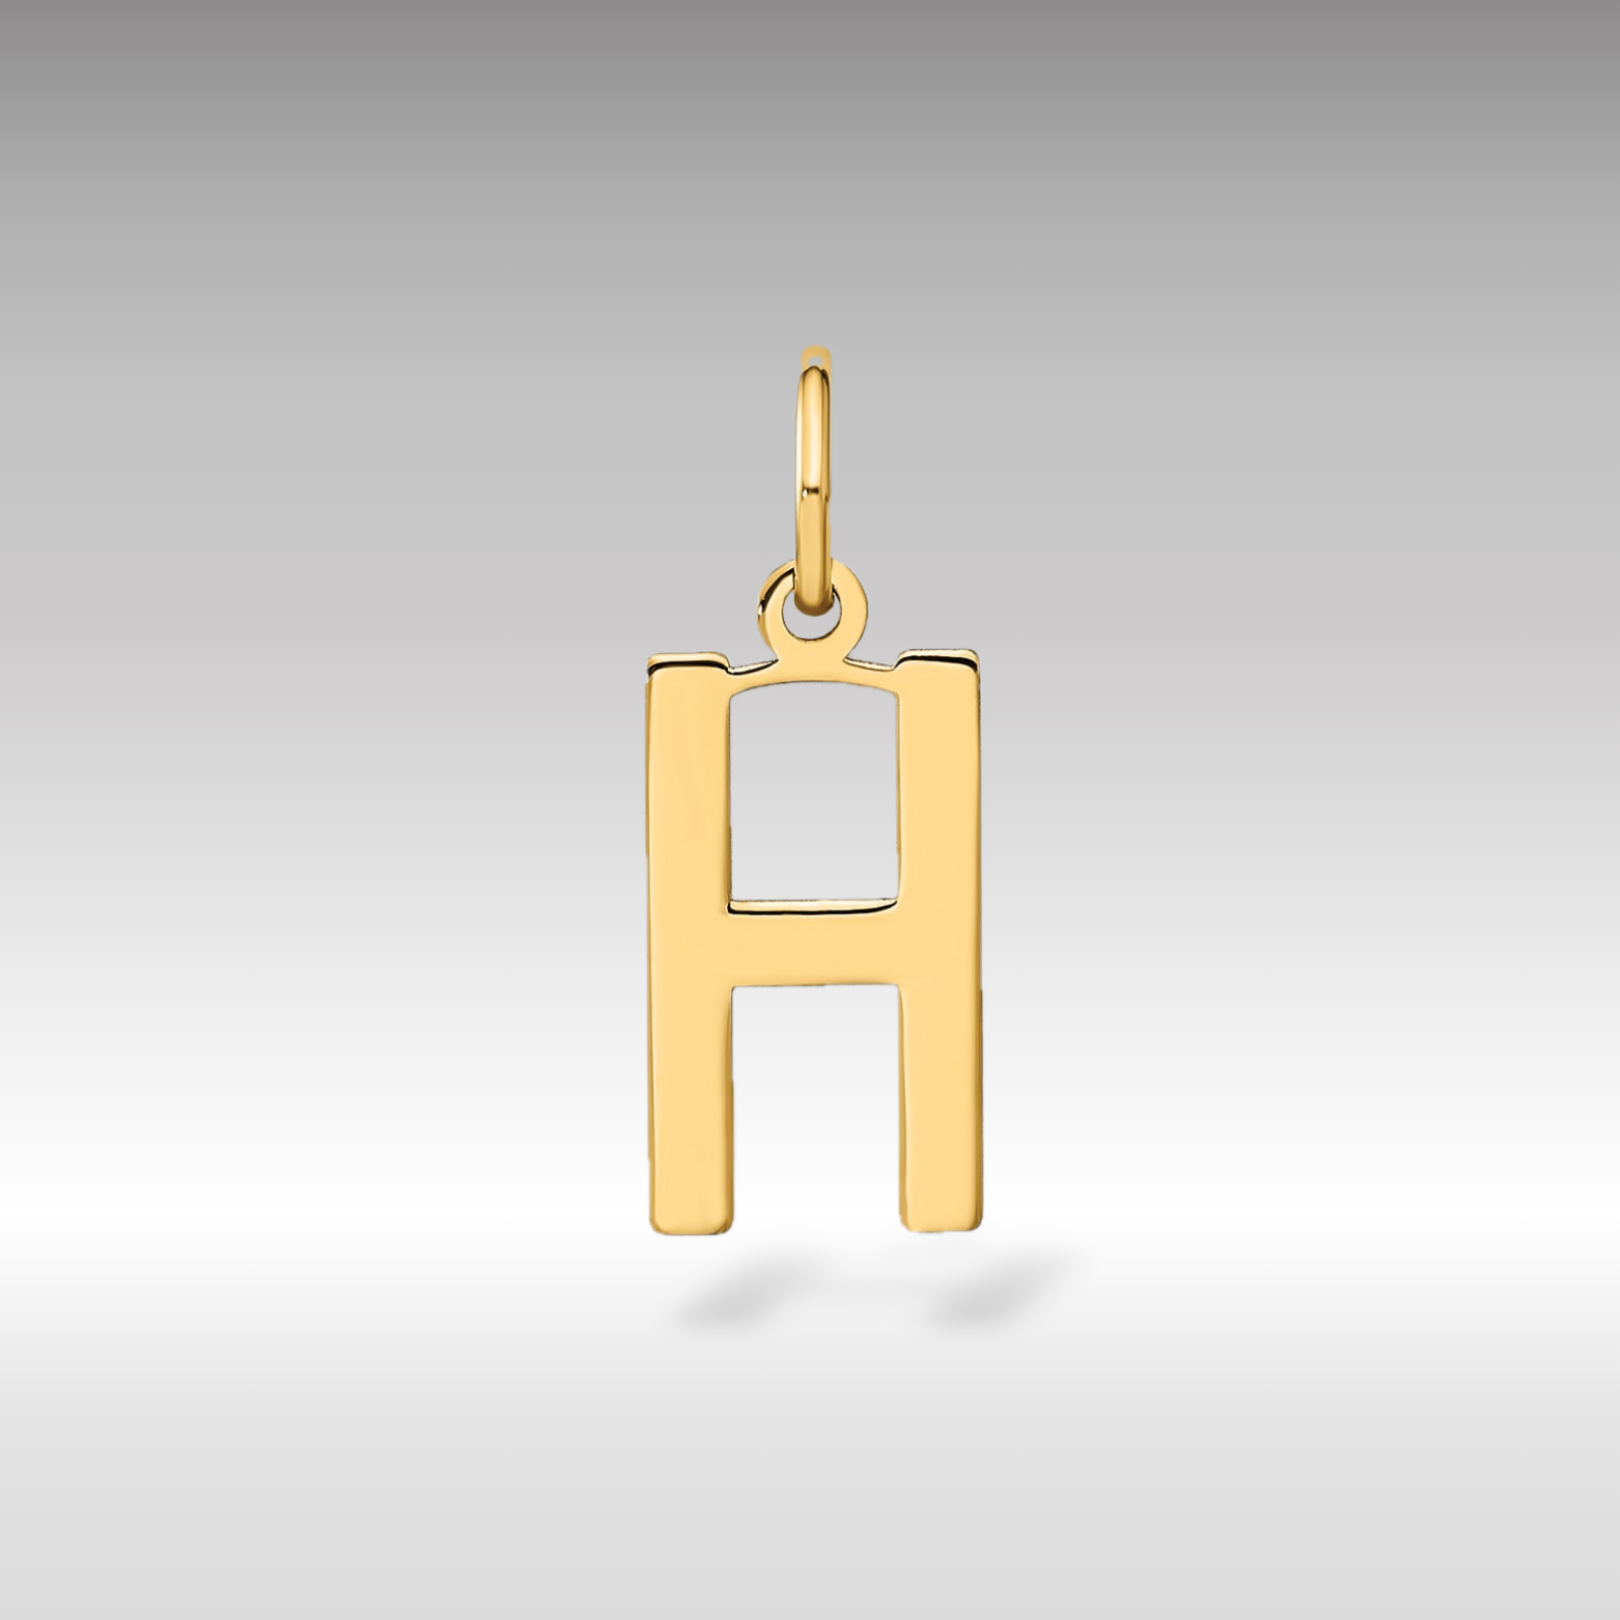 14K Gold Letter "H" Initial Pendant - Charlie & Co. Jewelry